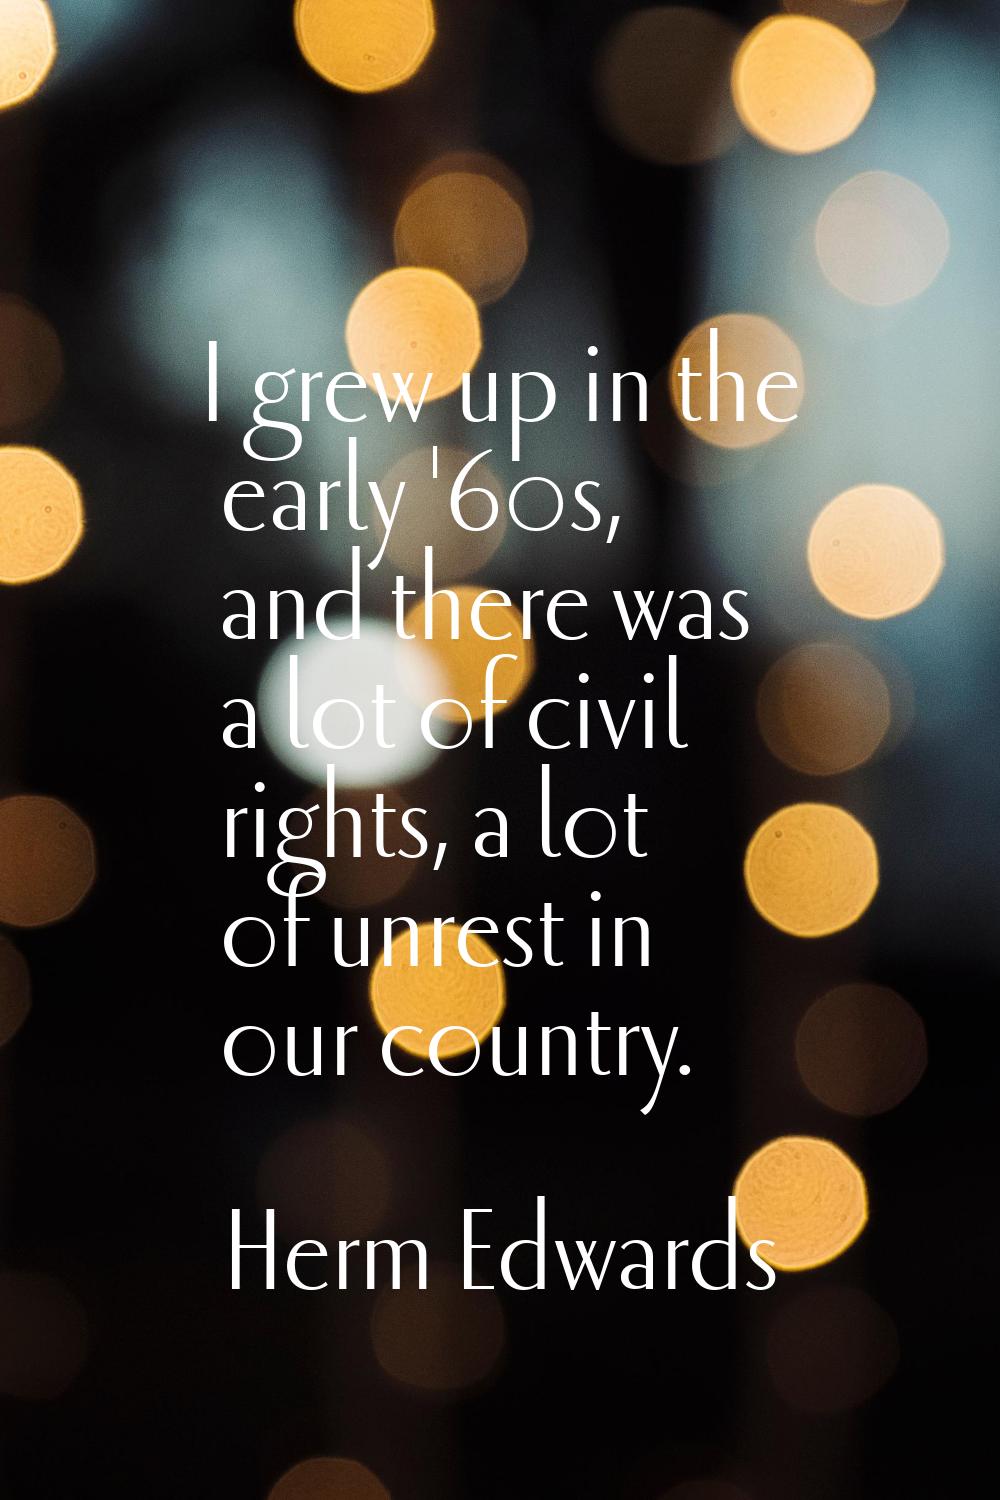 I grew up in the early '60s, and there was a lot of civil rights, a lot of unrest in our country.